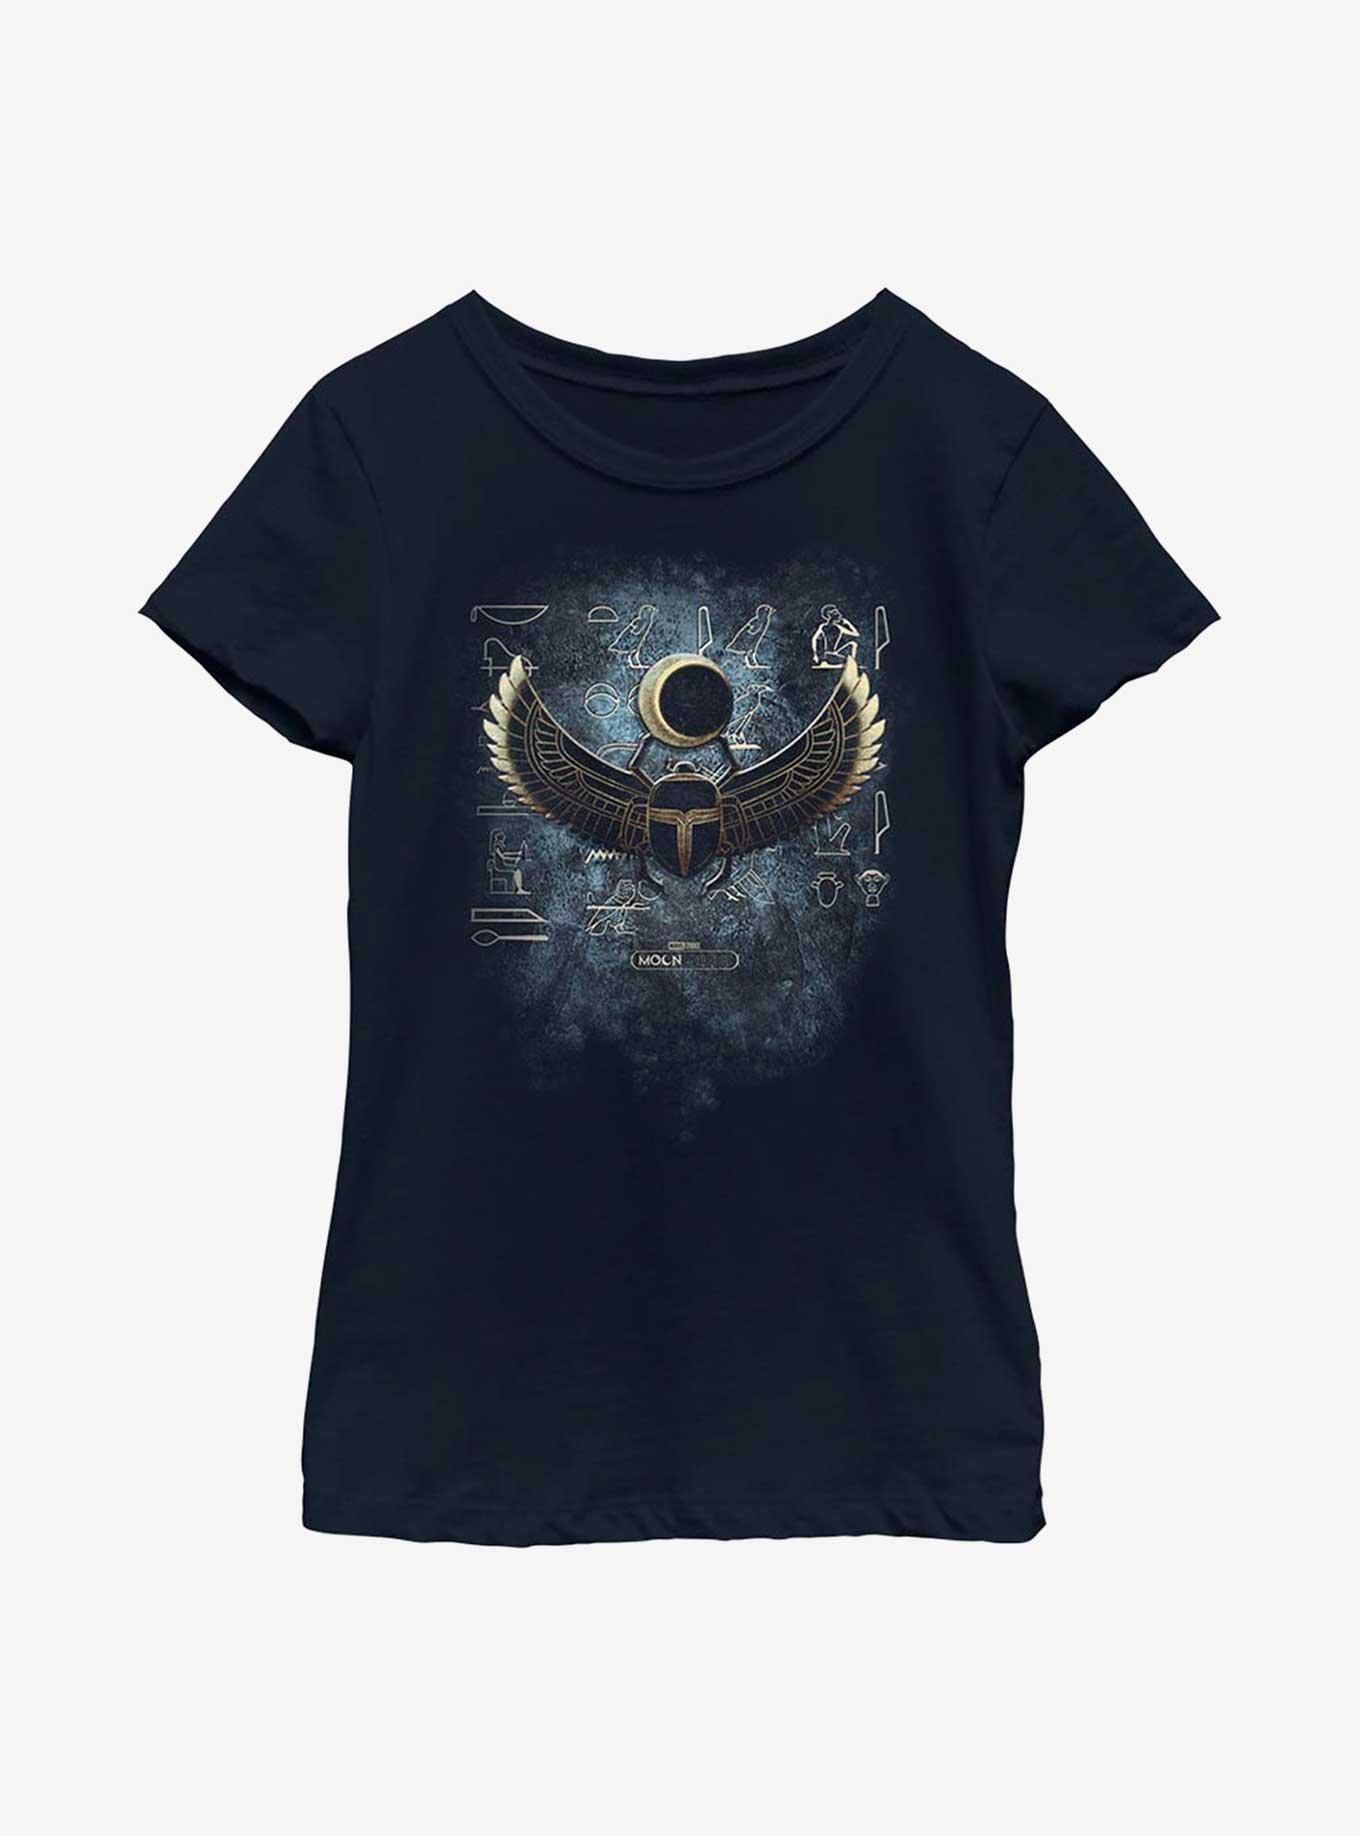 Marvel Moon Knight Ancient Relic Youth Girls T-Shirt, NAVY, hi-res